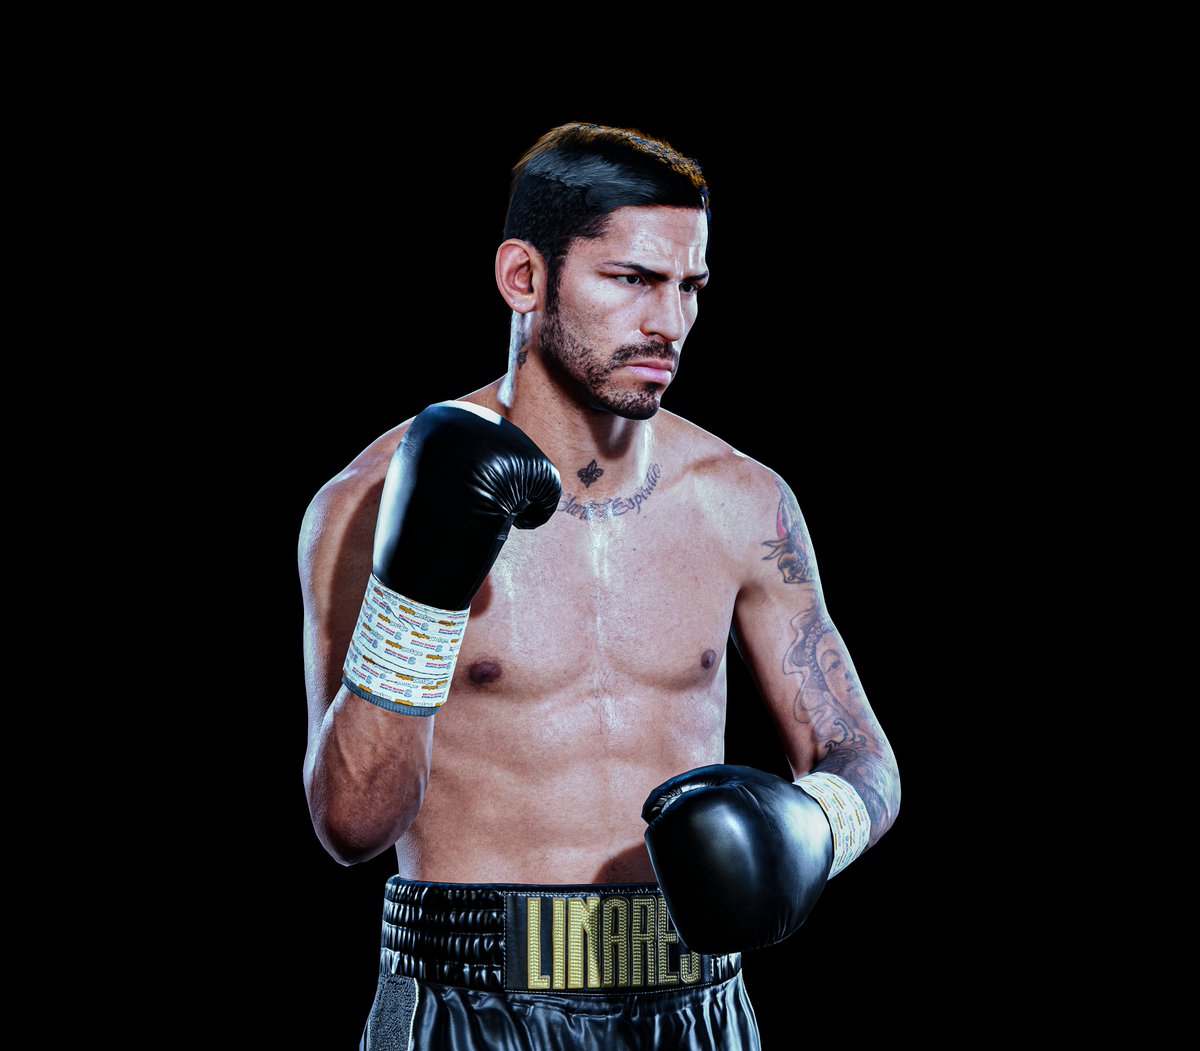 Happy to confirm that 'Golden Boy' @JorgeLinares, a former world champion in 3 weight divisions, will be available on day 1 of early access in Undisputed! #BecomeUndisputed 🥊